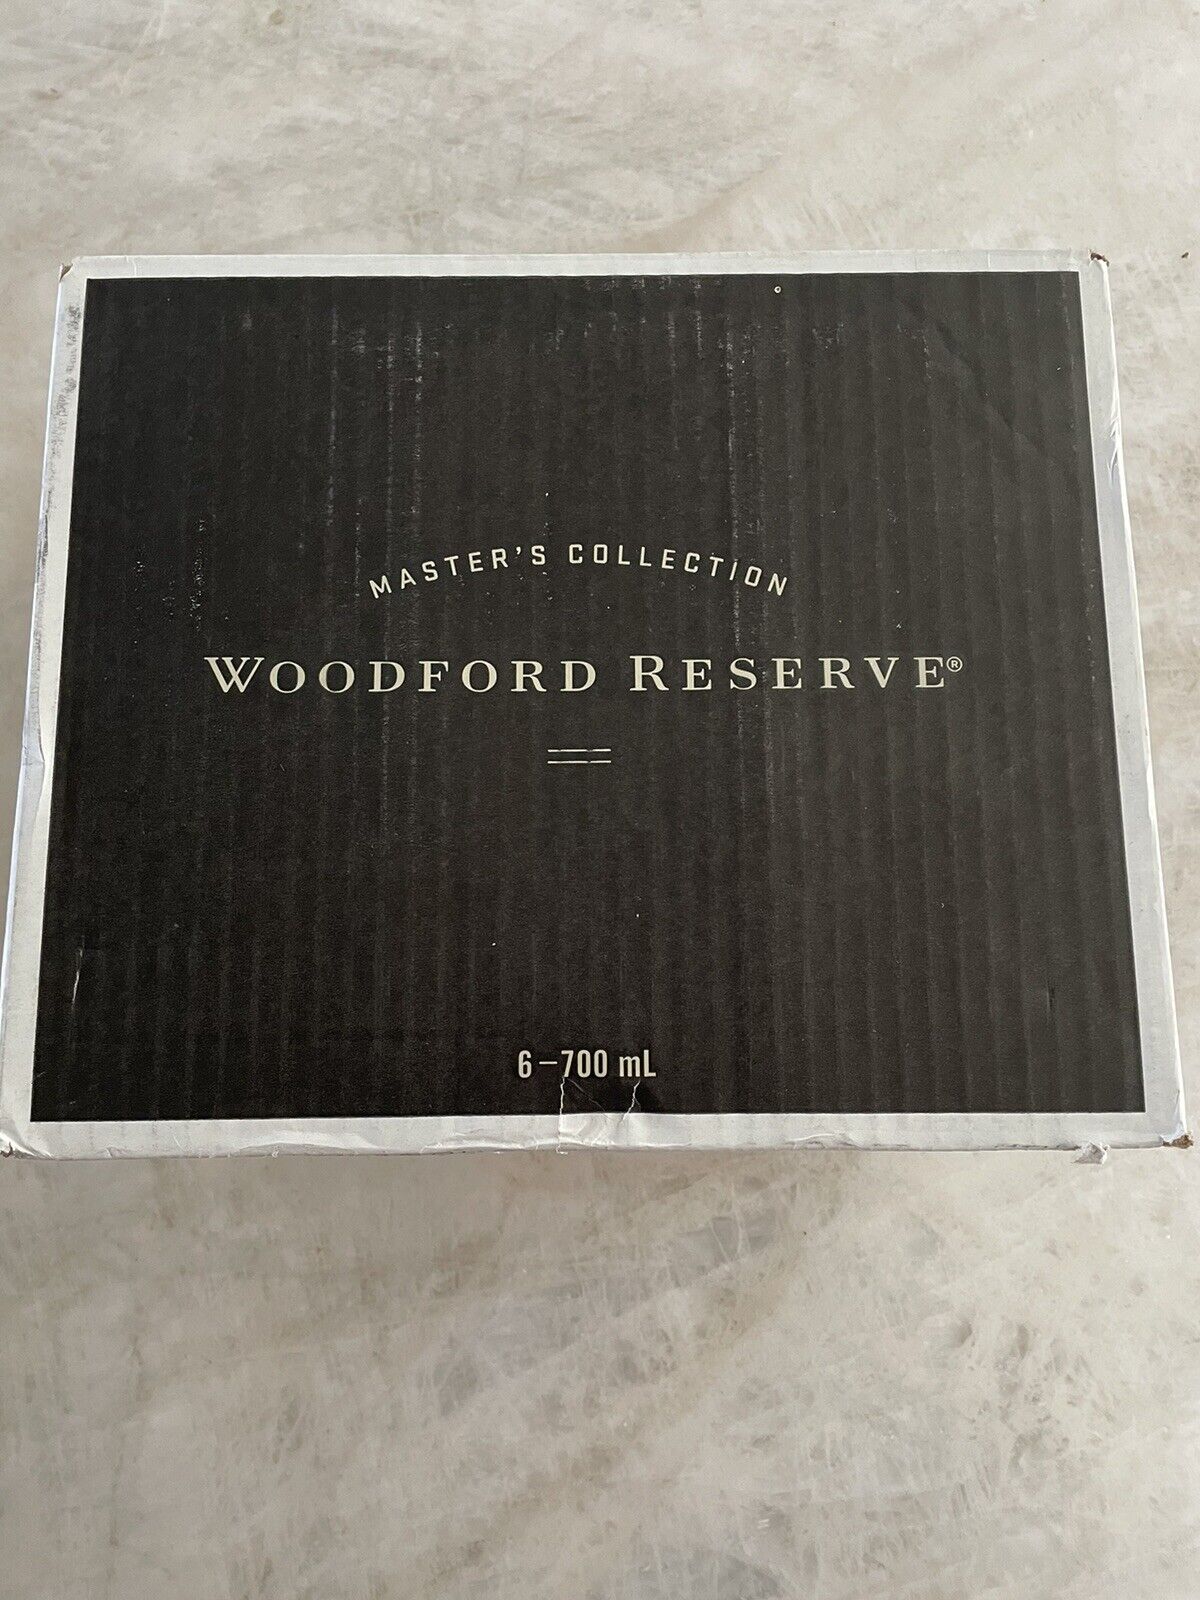 Woodford Reserve Master’s Collection Empty Box Bourbon Whiskey Kentucky Derby